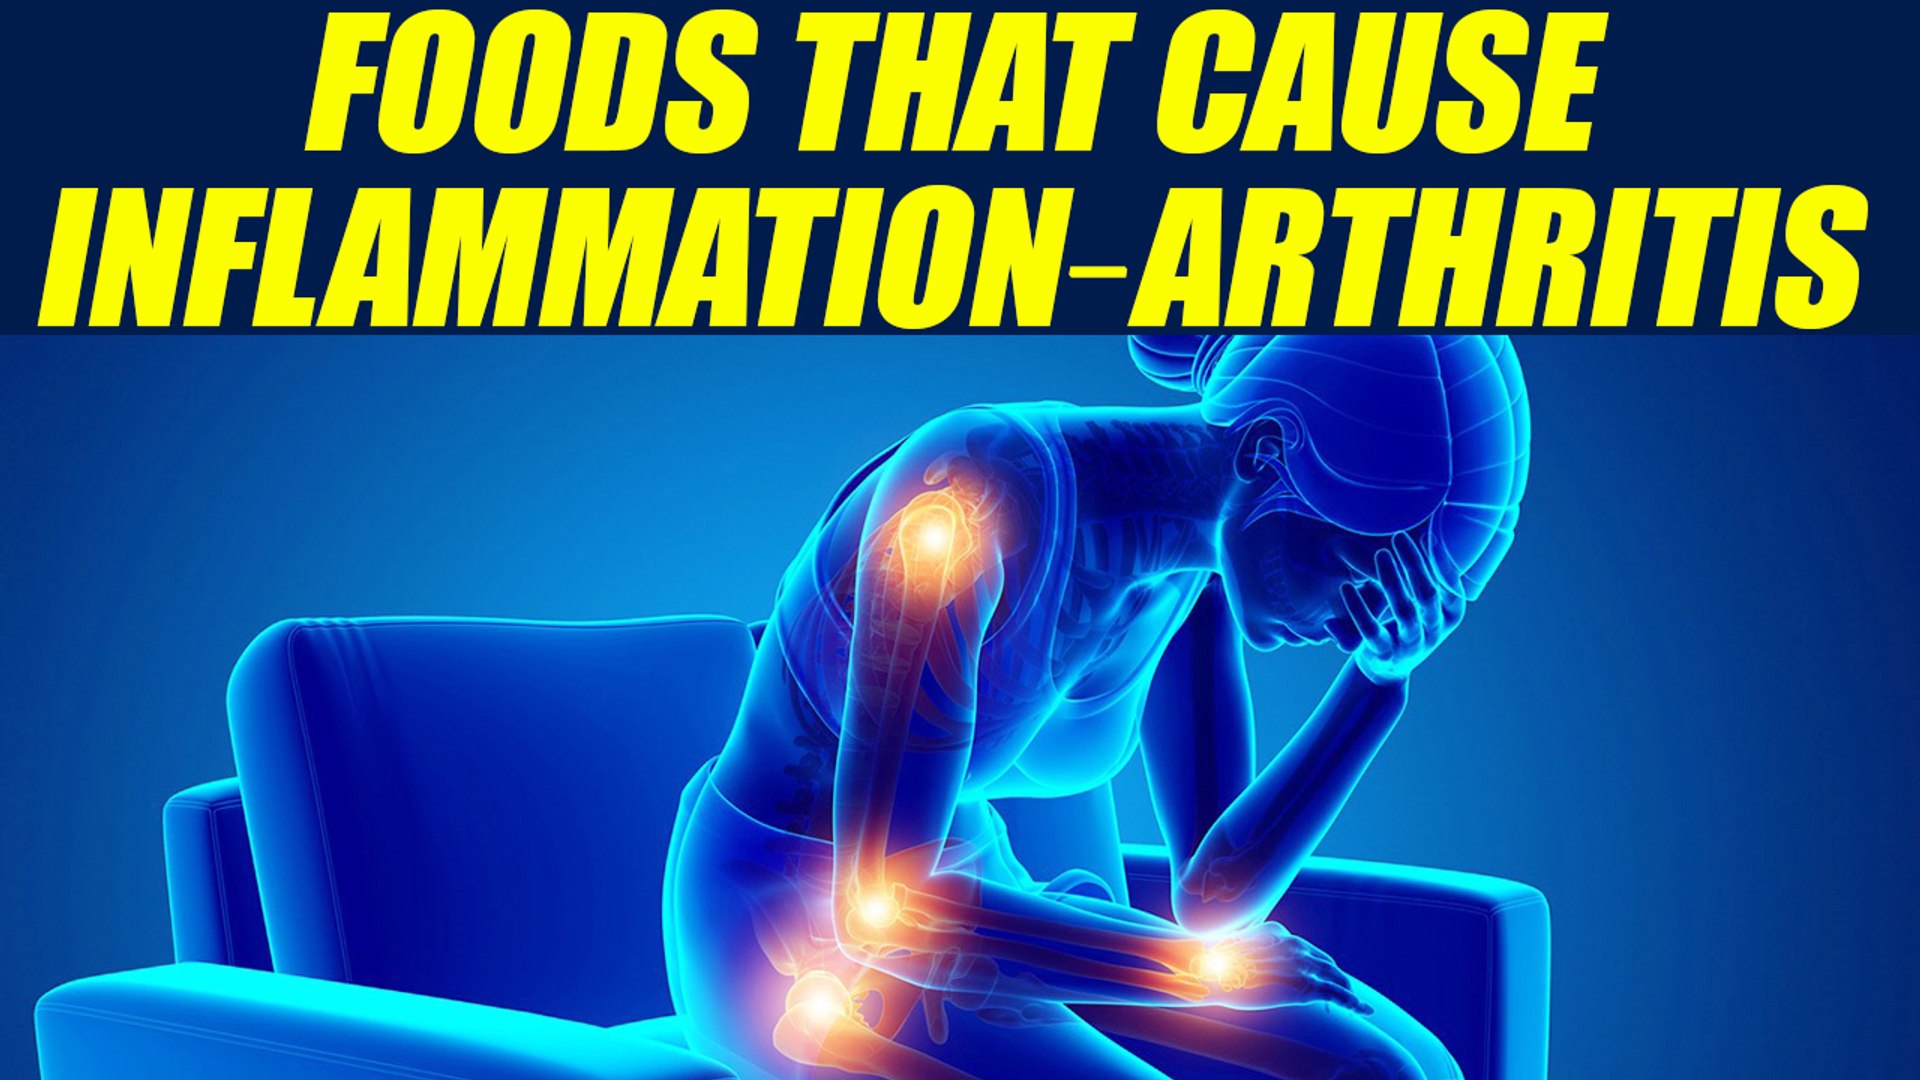 10 FOODS THAT CAUSE INFLAMMATION